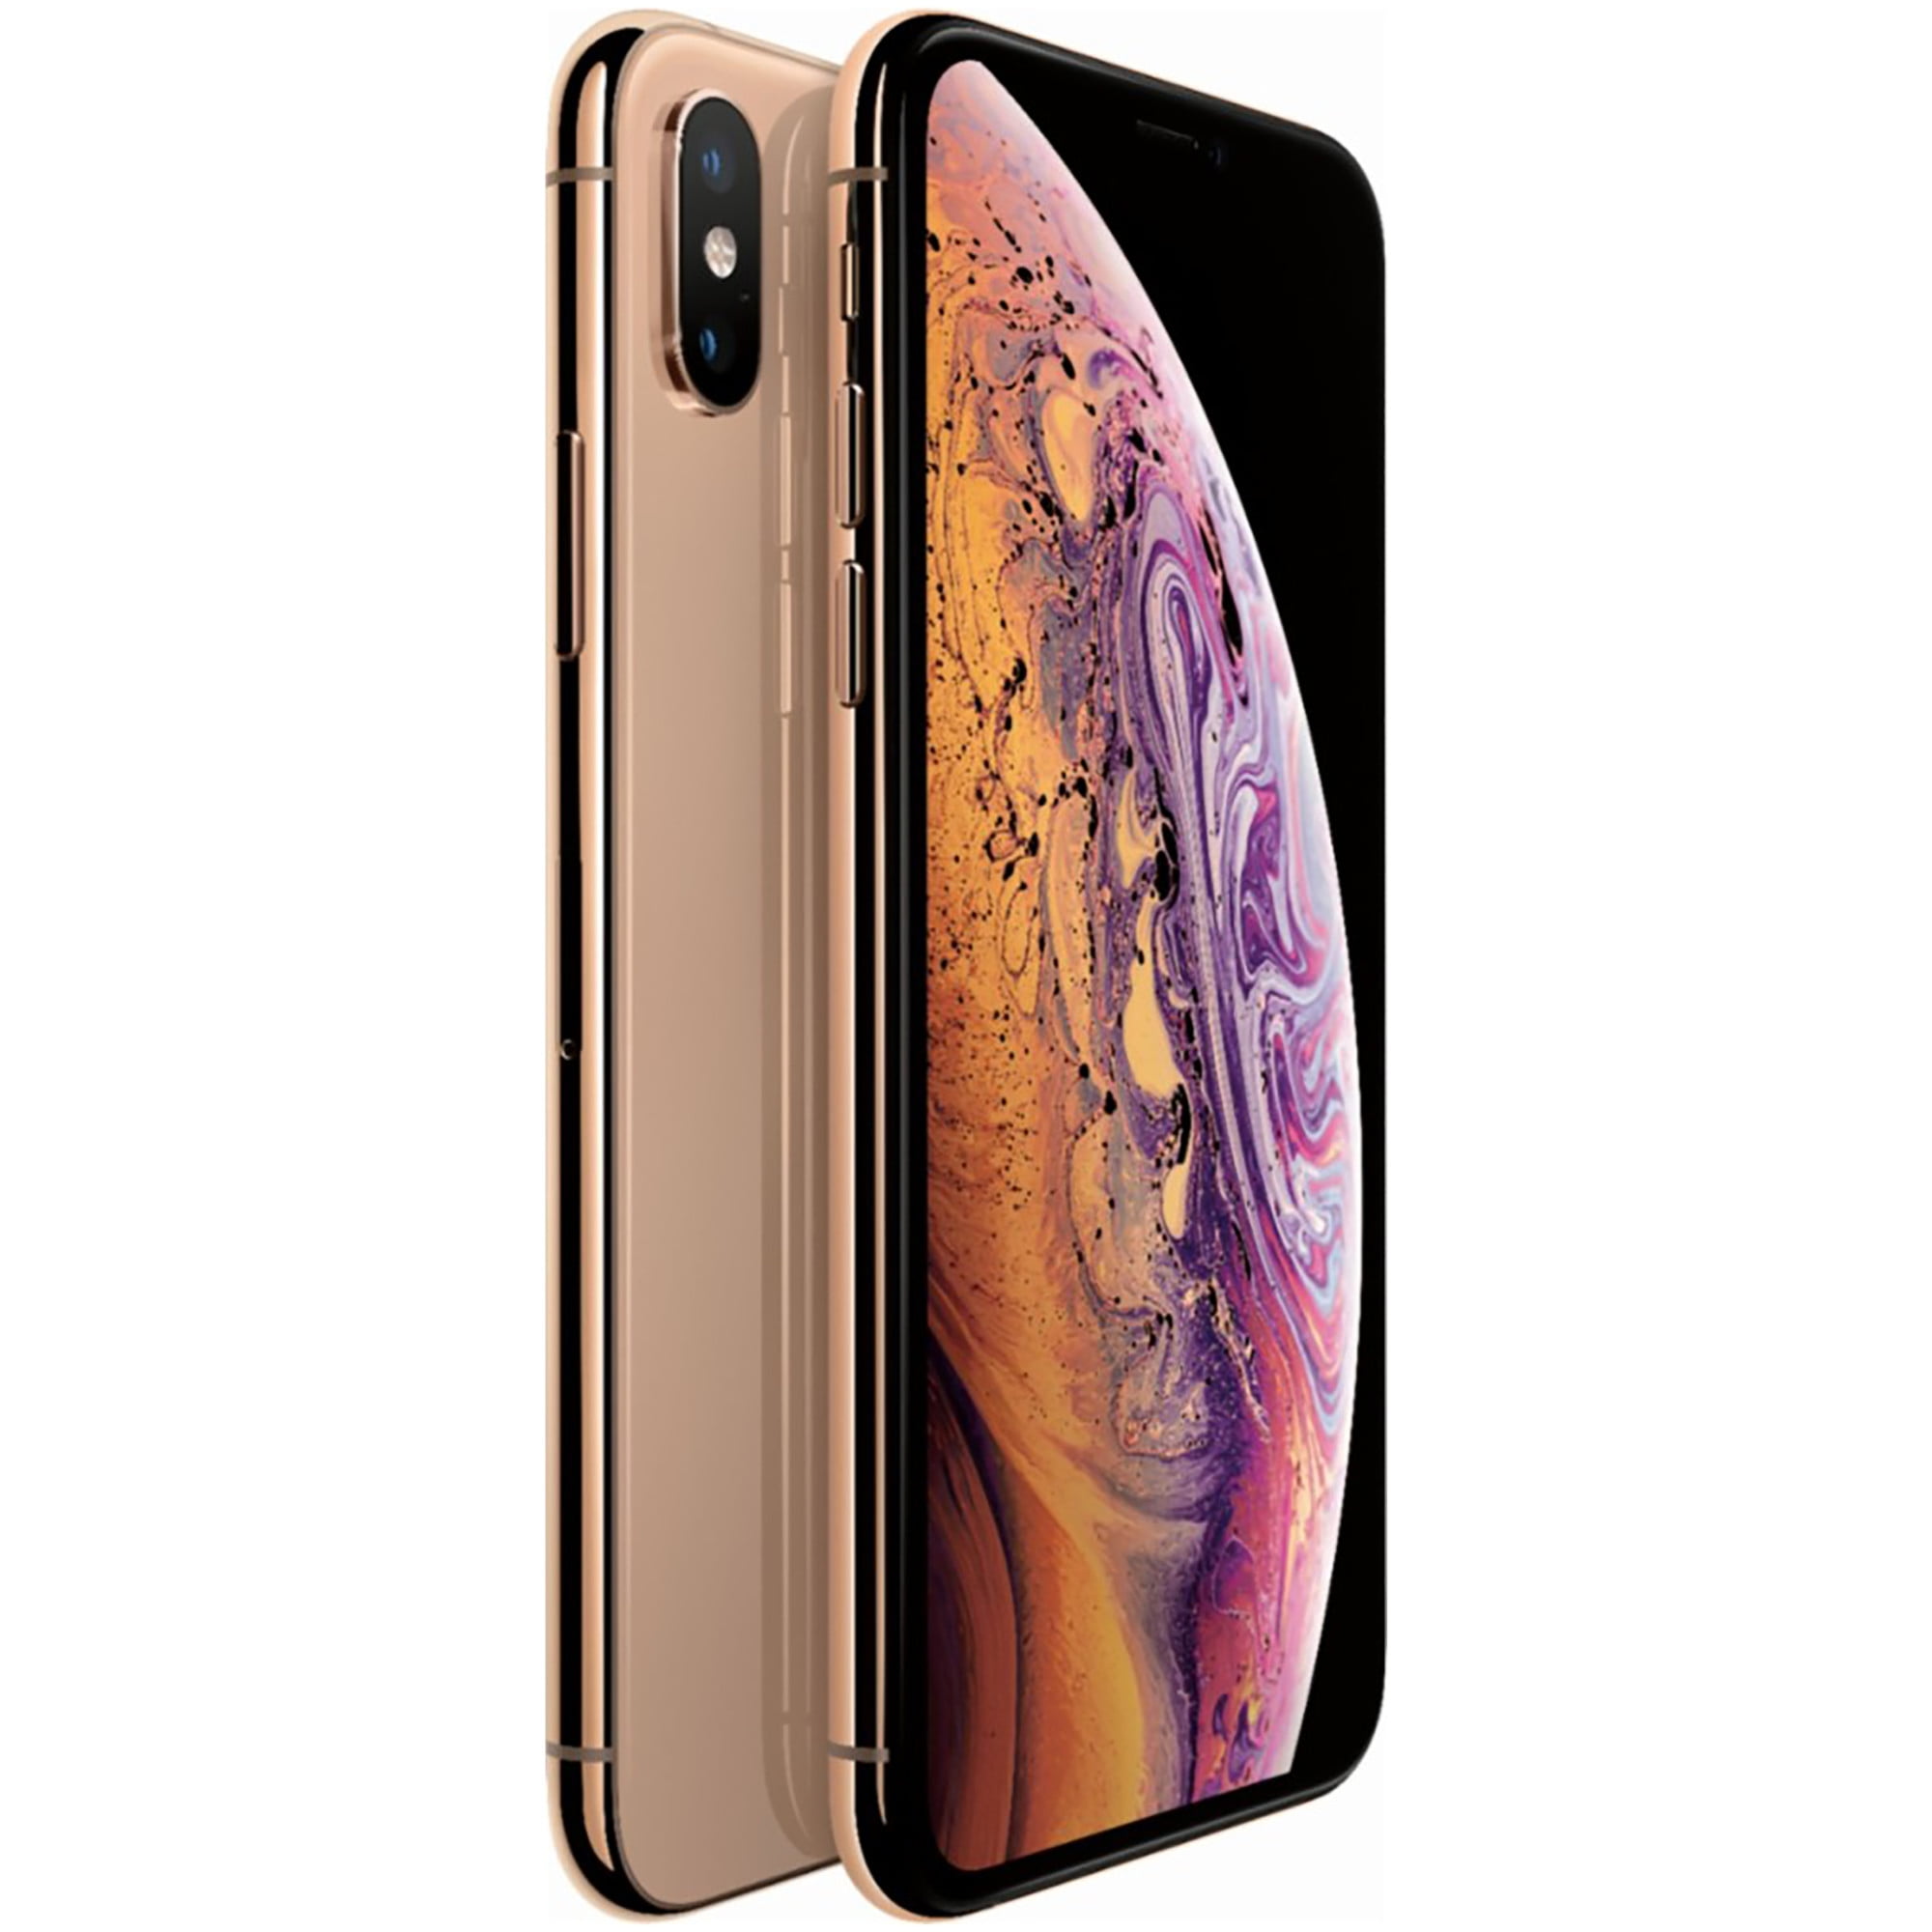 Apple Grey/Silver/Gold Iphone XS 64GB, 16MP at Rs 38500/piece in Kanpur